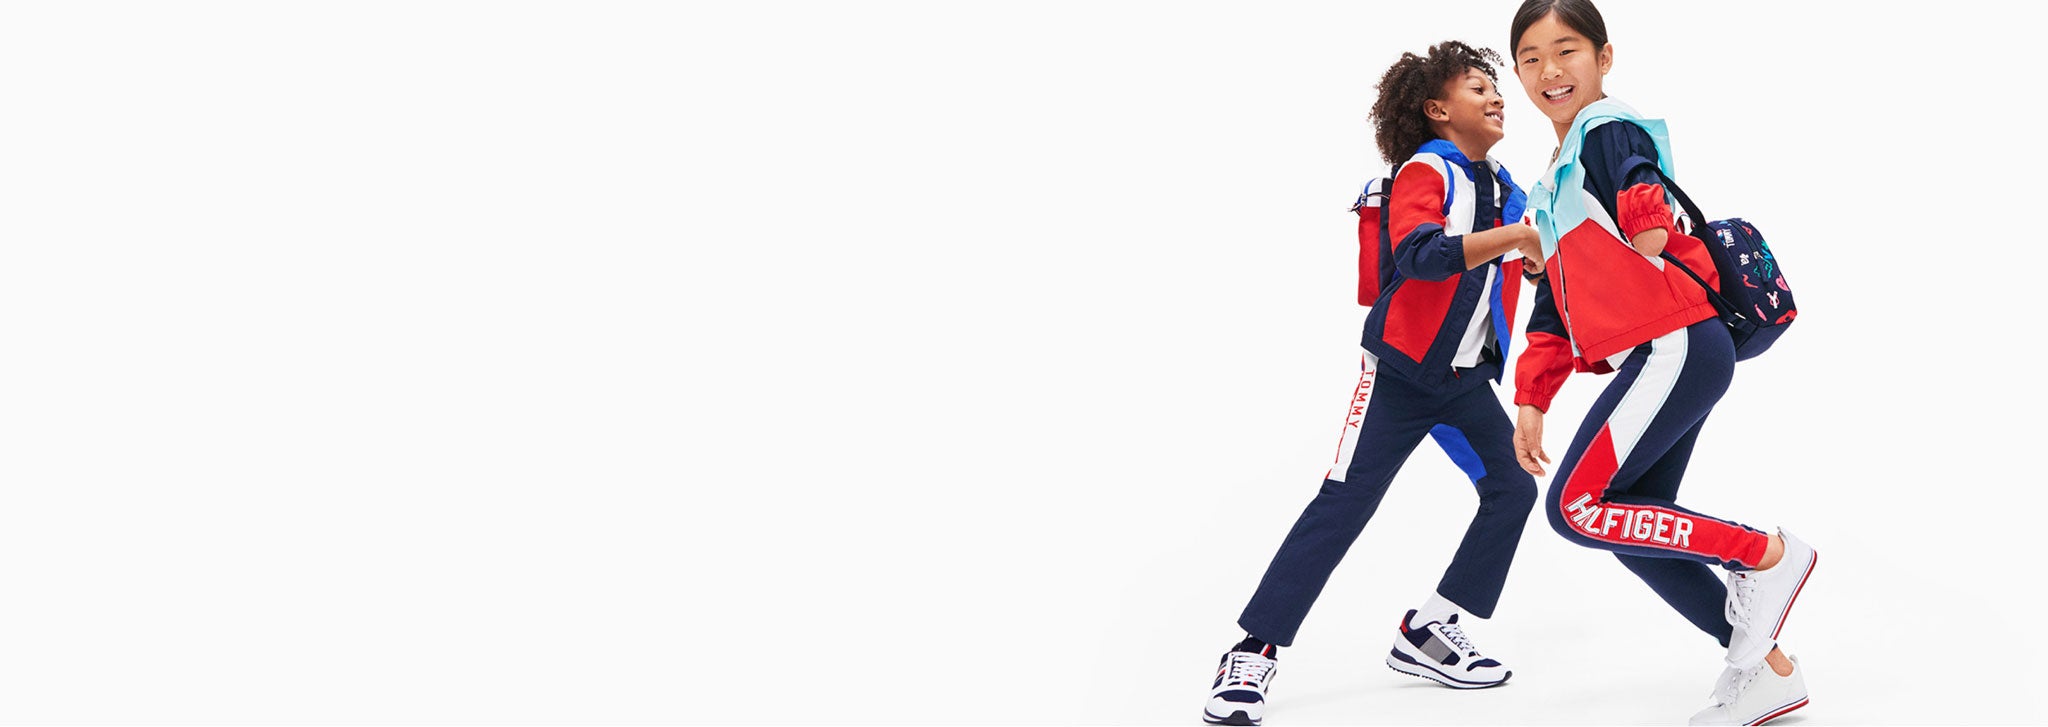 tommy hilfiger clearance online